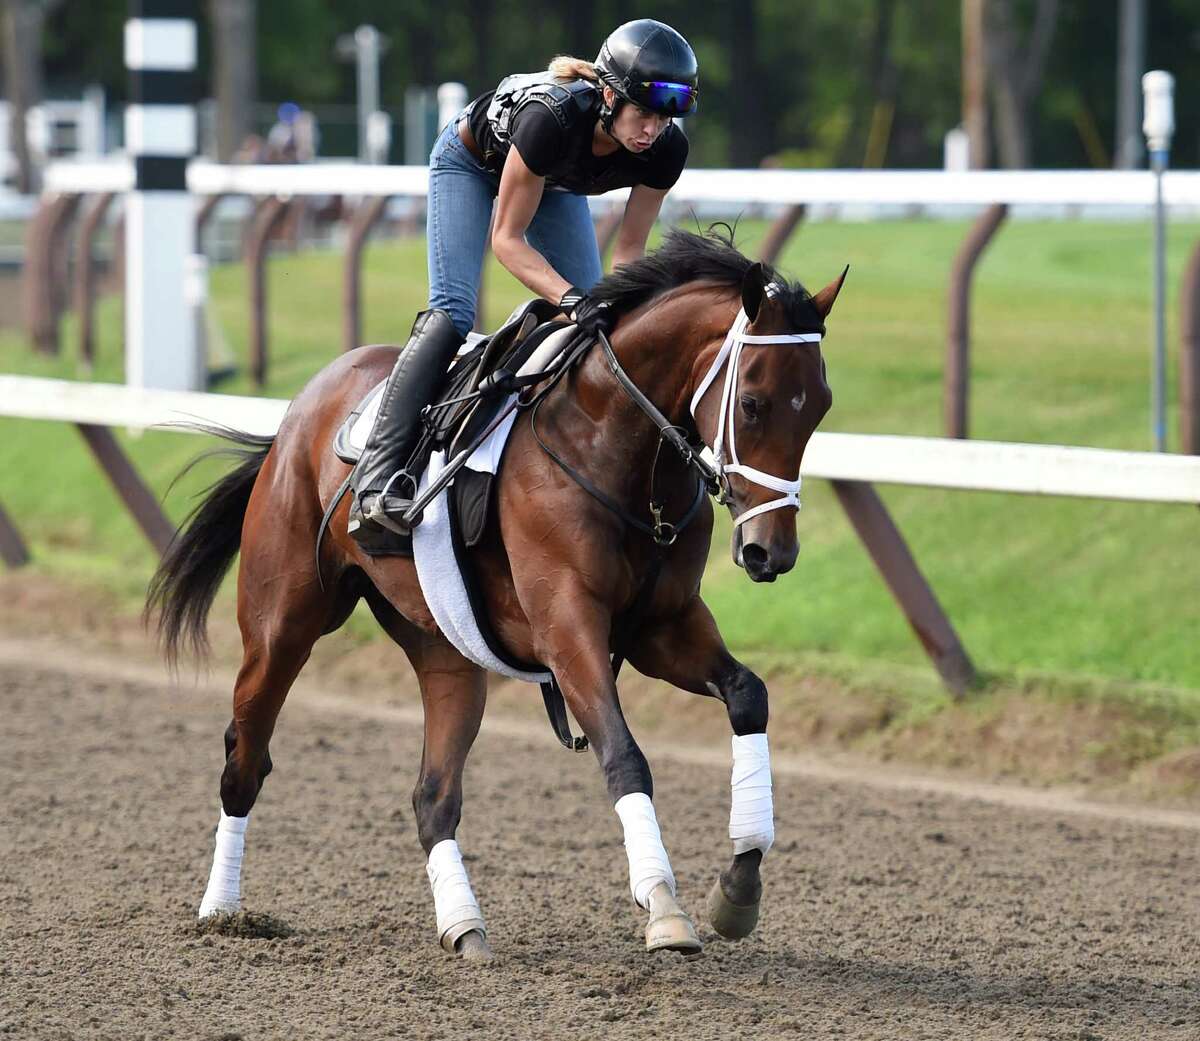 Rachel's Valentina goes out for her exercise this morning July 22, 2015, on the main track at the Saratoga Race Course in Saratoga Springs, N.Y. (Skip Dickstein/Times Union)